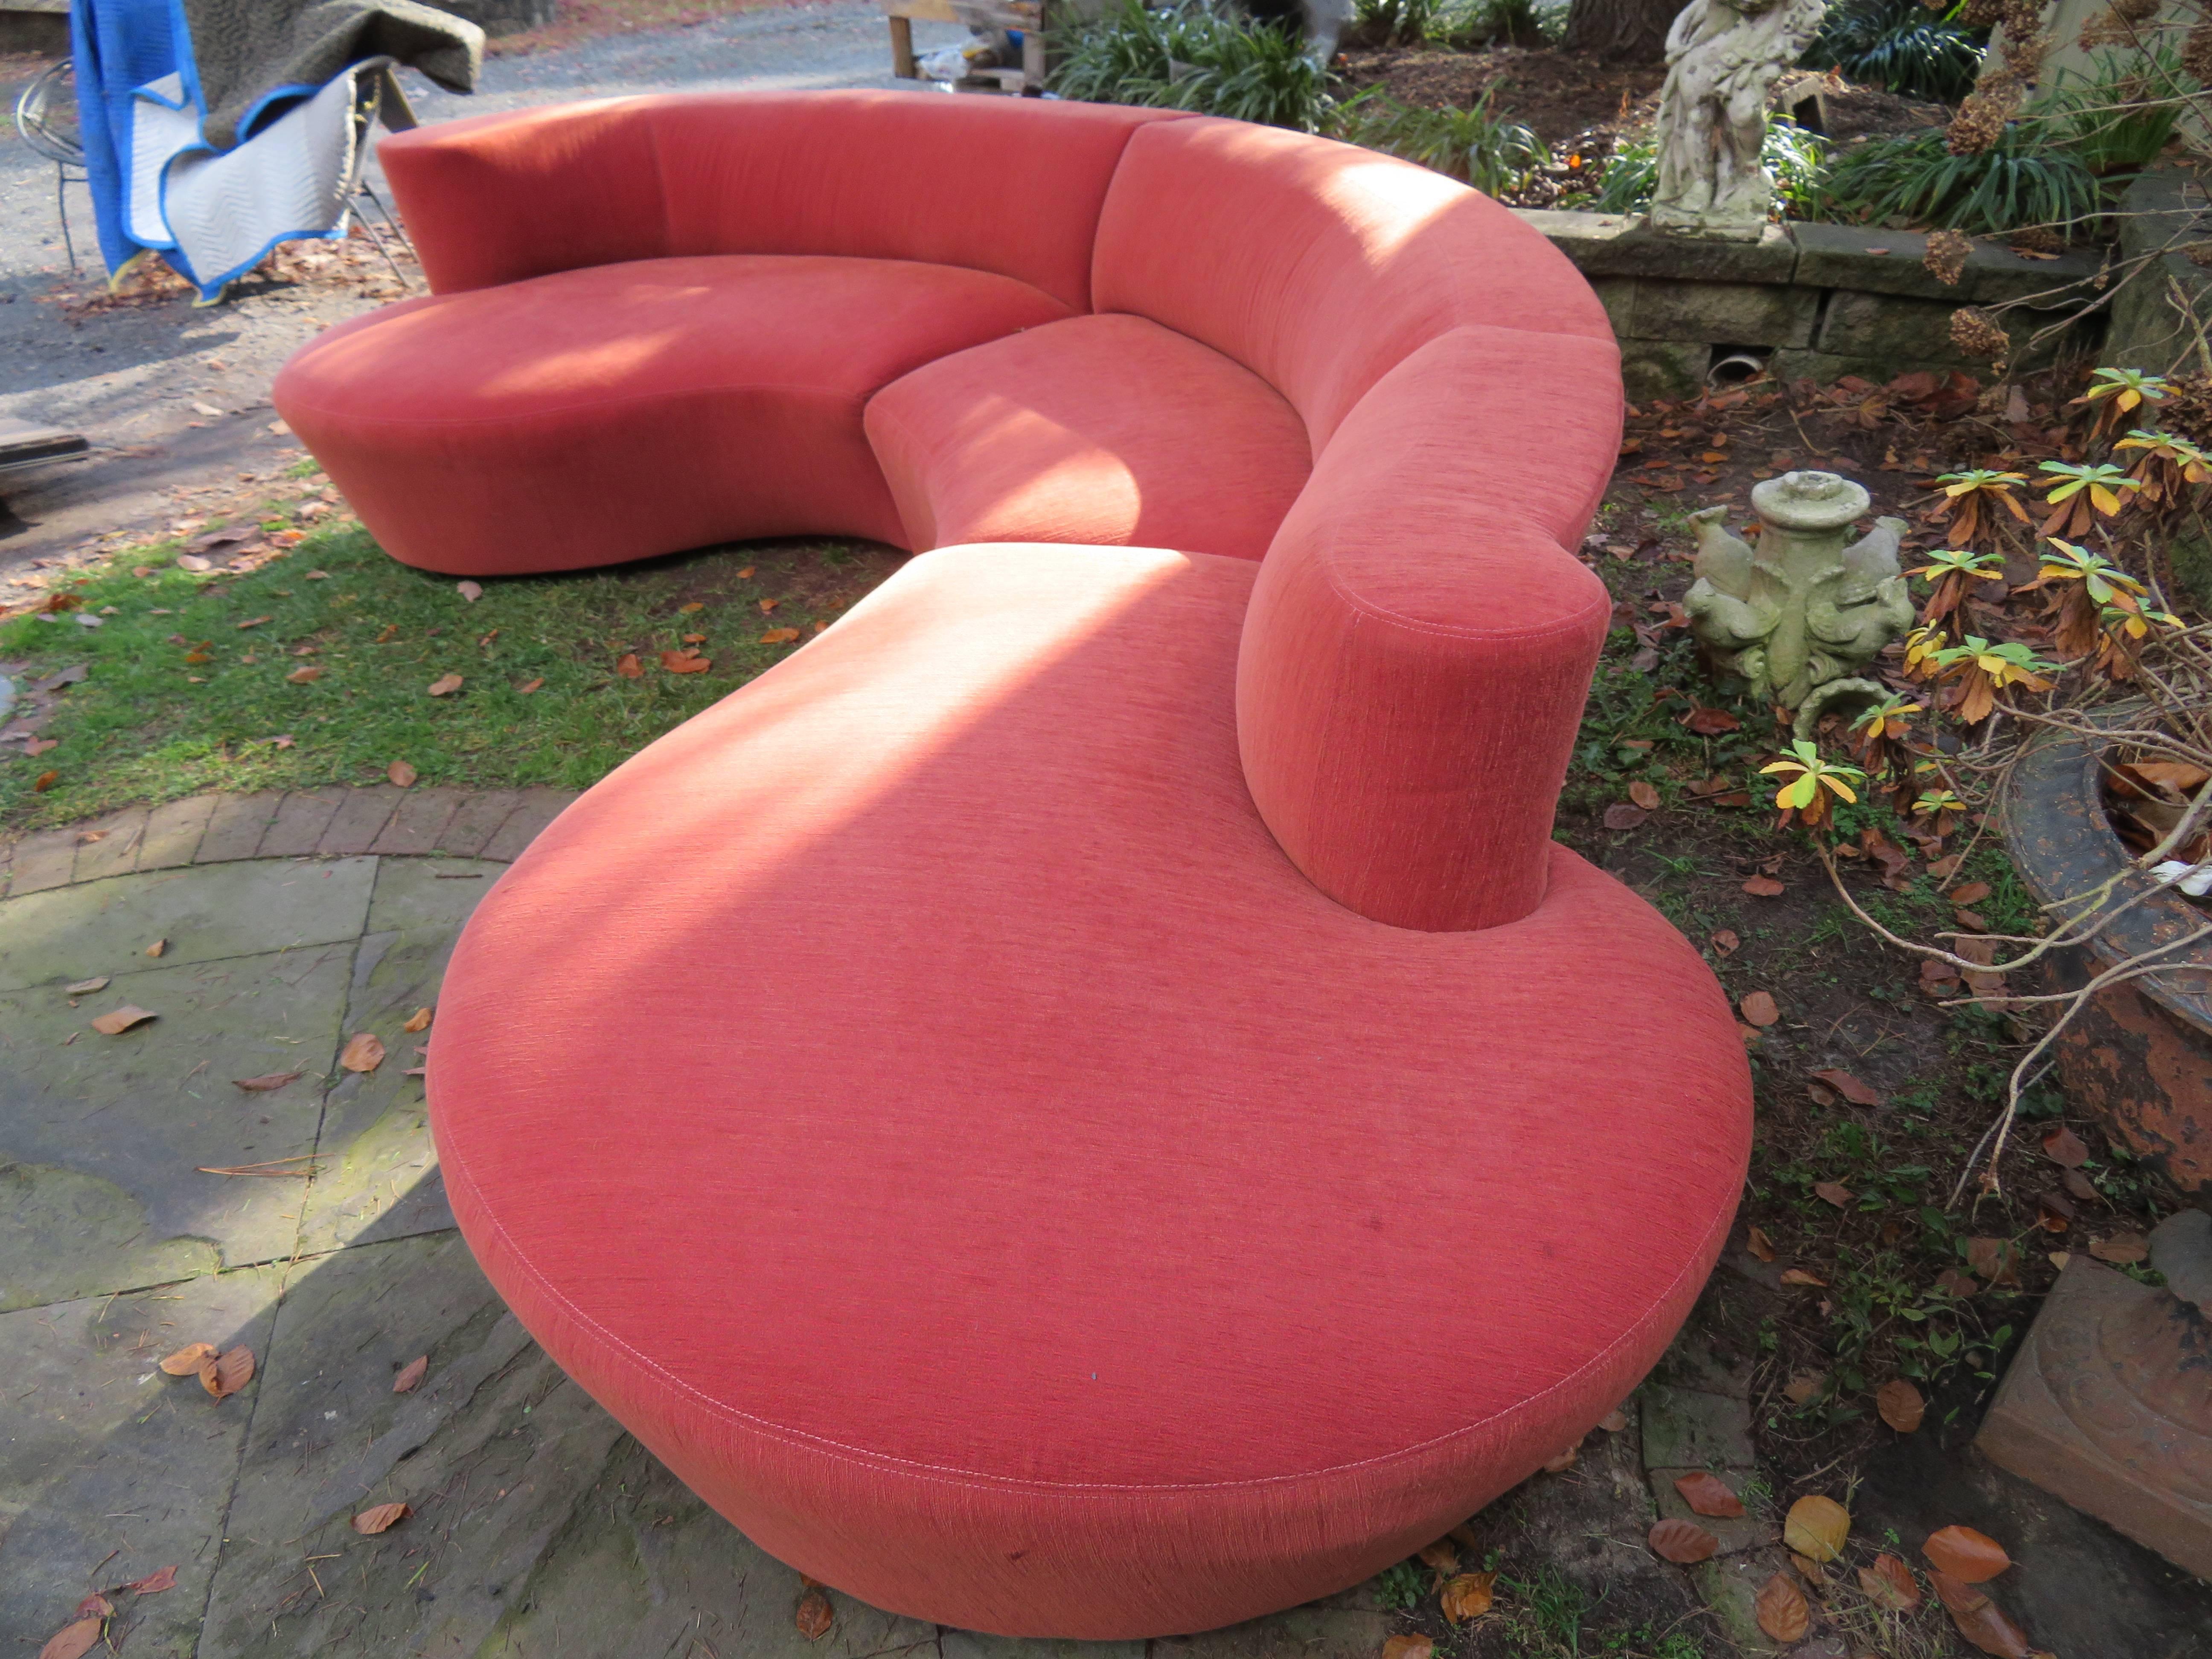 Excellent Vladimir Kagan three-piece serpentine sofa sectional by Weiman. This sofa section is fabulous in person with little to no wear to the original sunset orange fabric. Please check out the matching Nautilus chairs in another of our 1stdibs